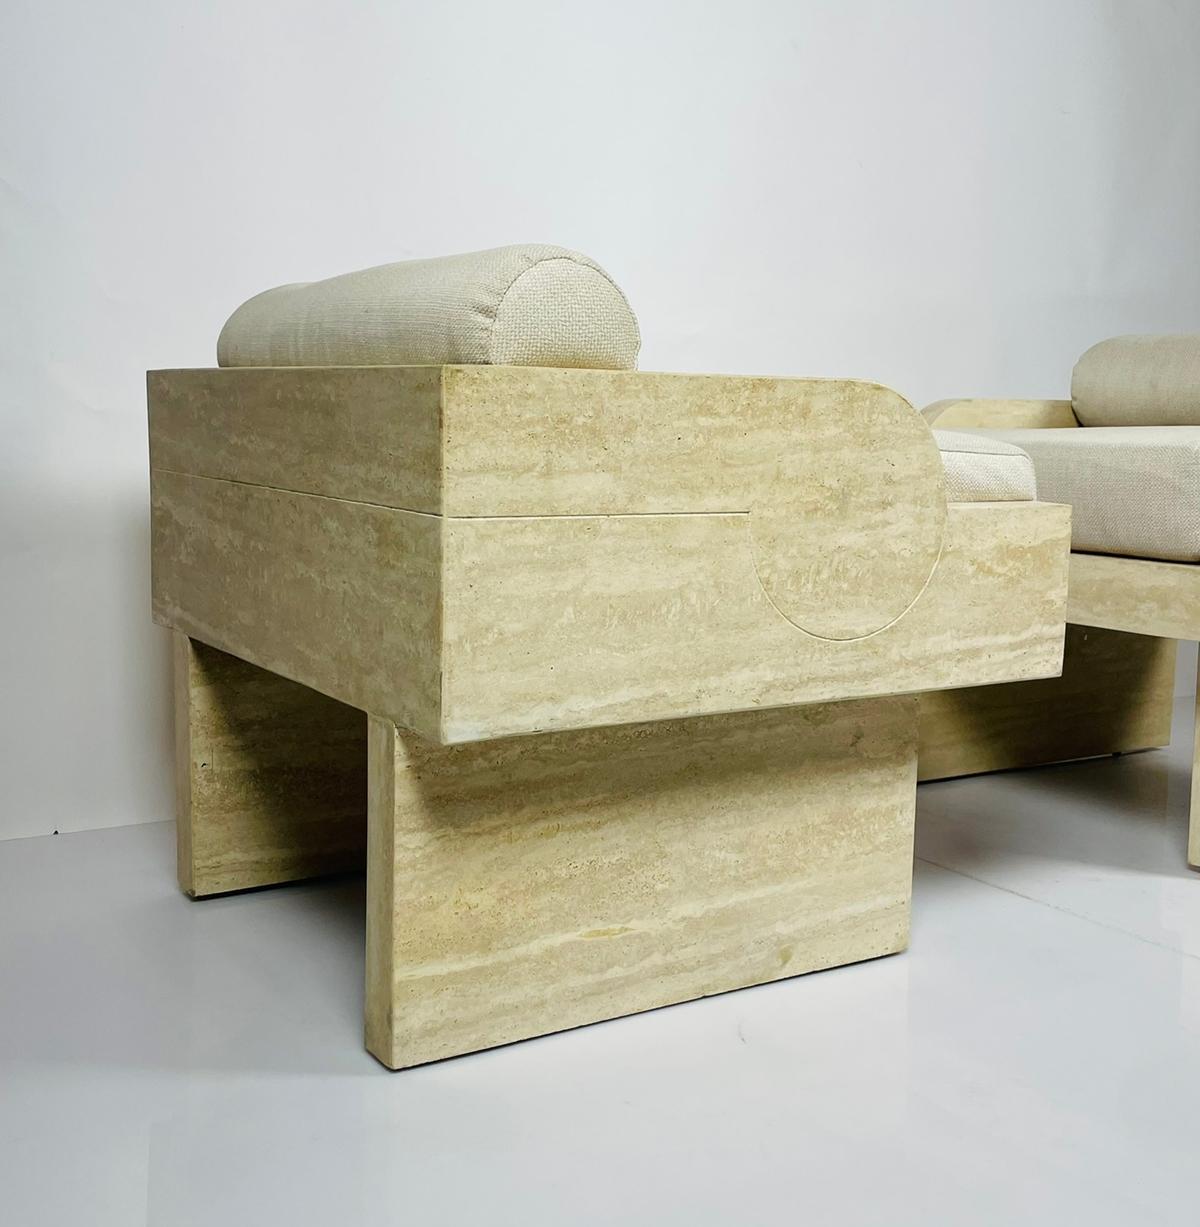 Upholstery Pair of Travertine Arm Chairs Attb to Stéphane Parmentier For Sale